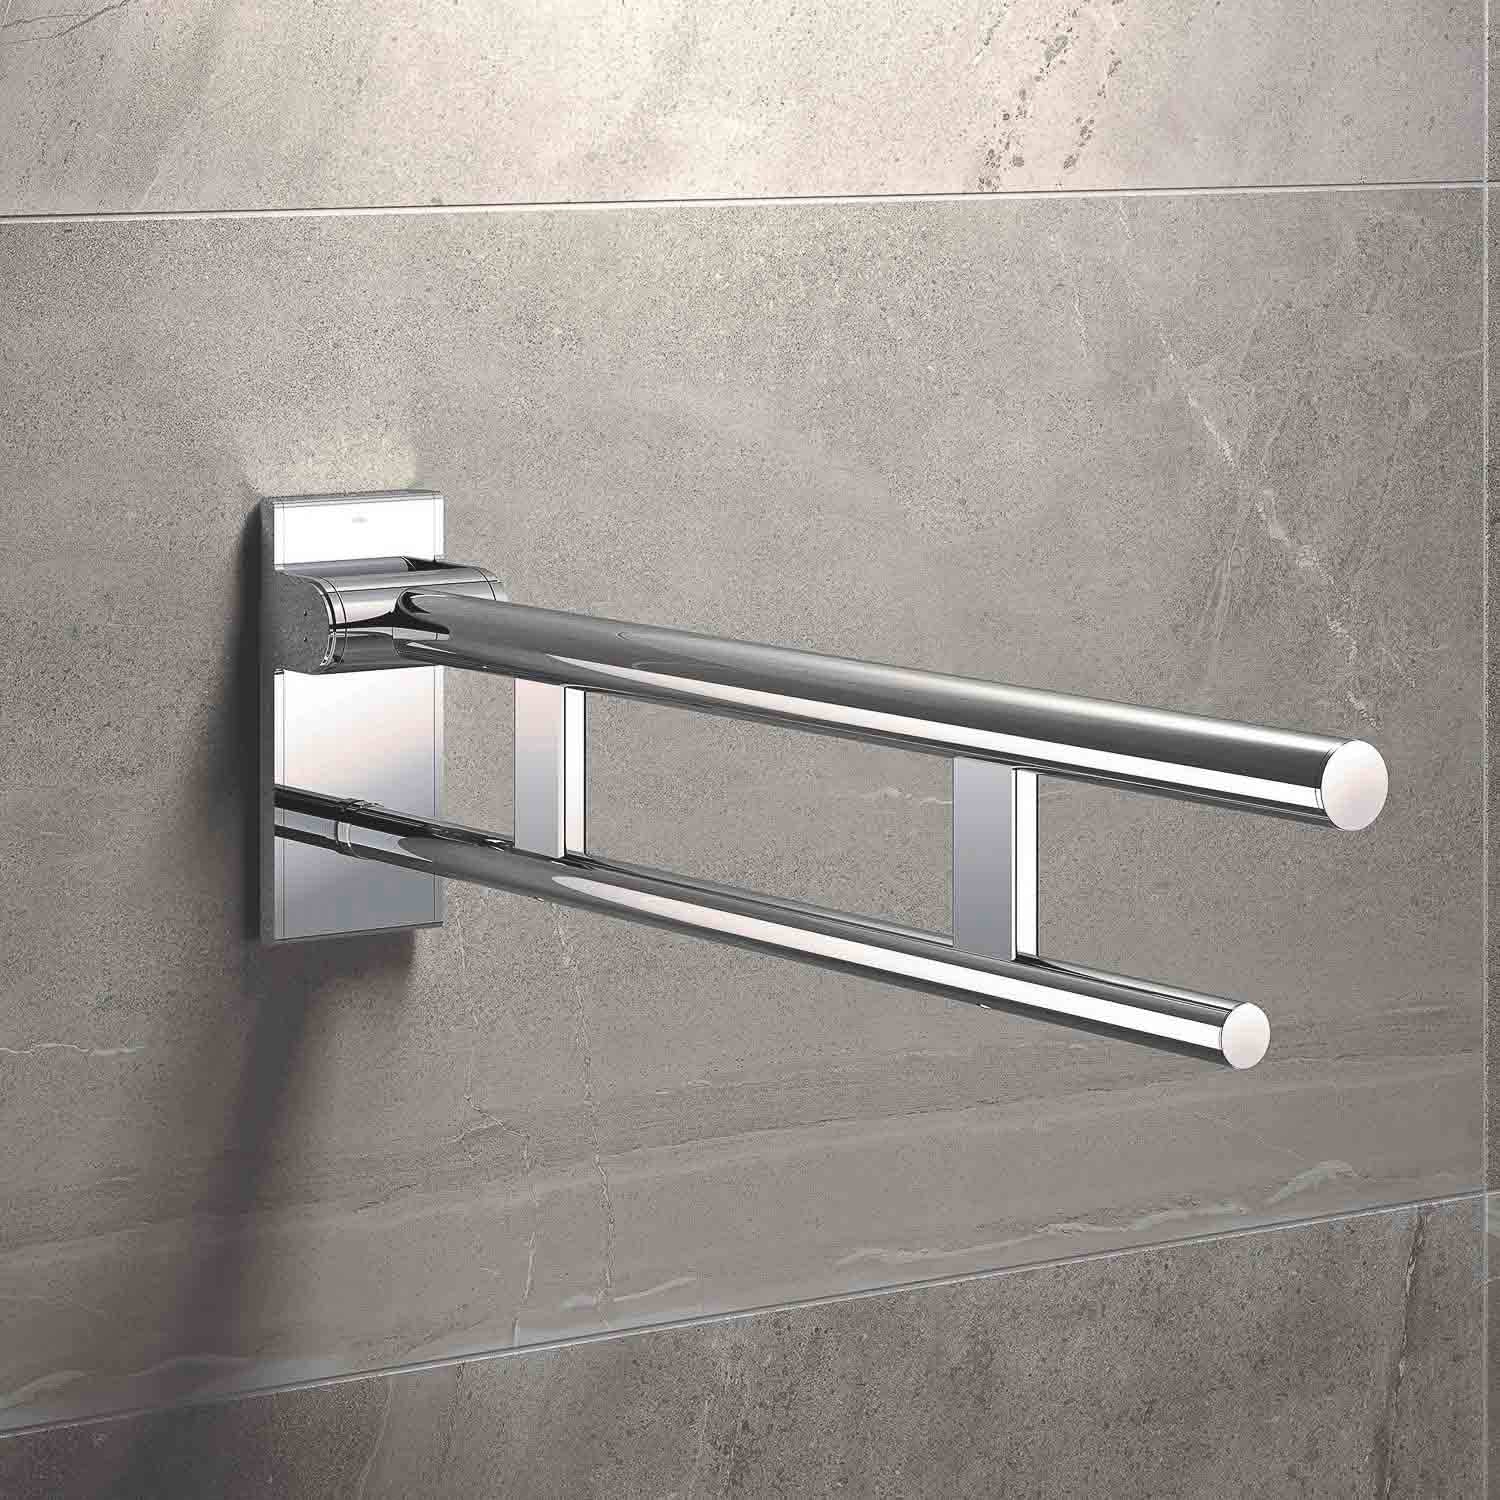 700mm Freestyle Hinged Grab Rail with a chrome finish lifestyle image